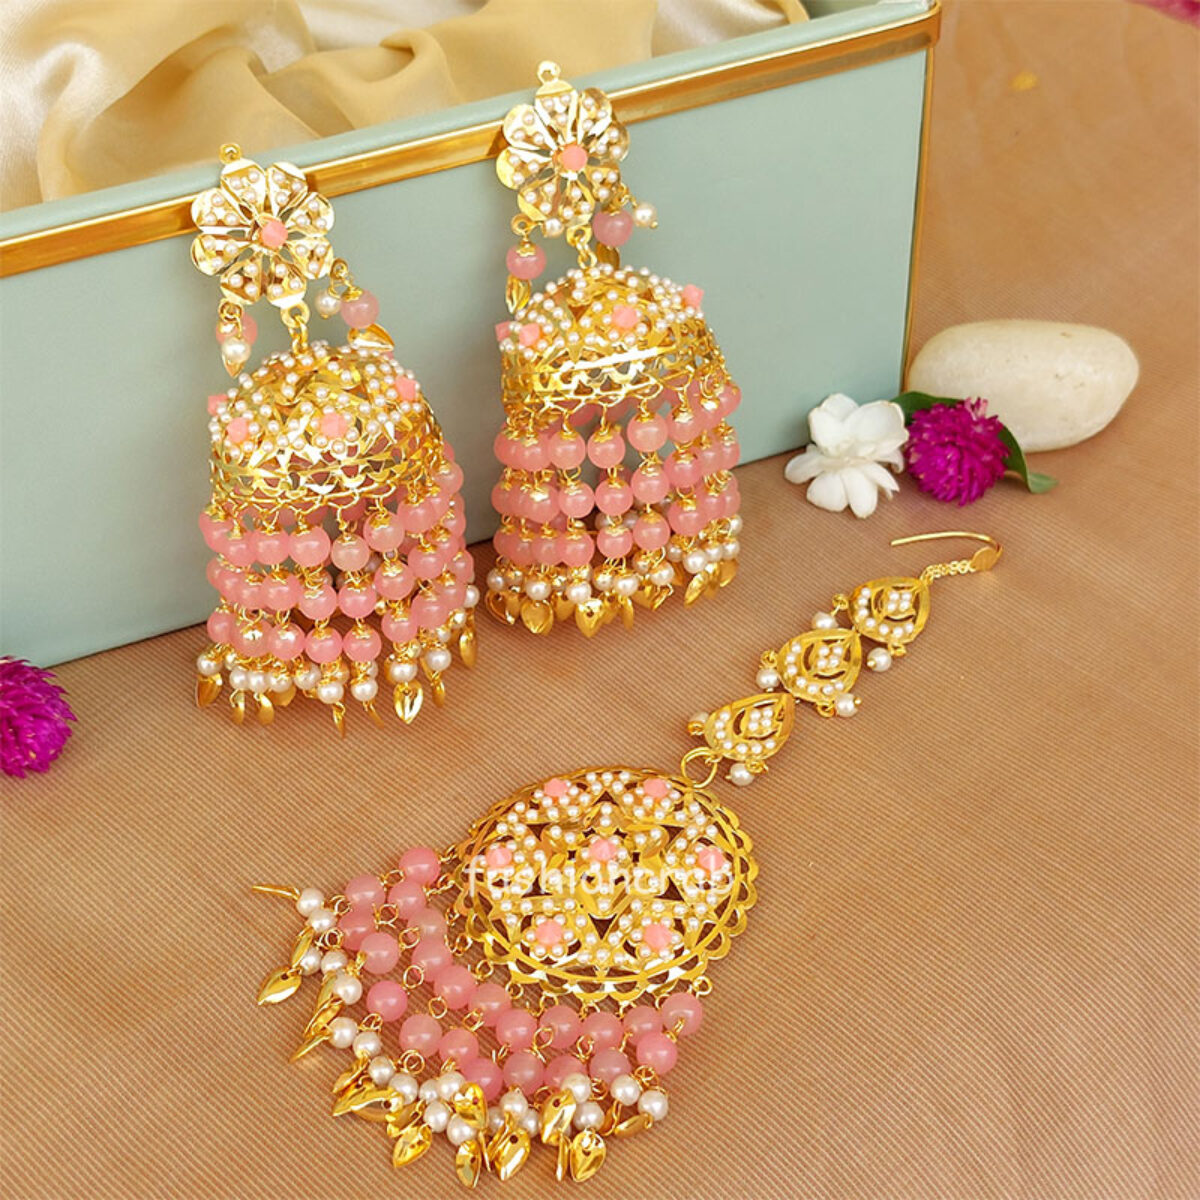 Earrings That Best Complement A Bridal Set For Weddings